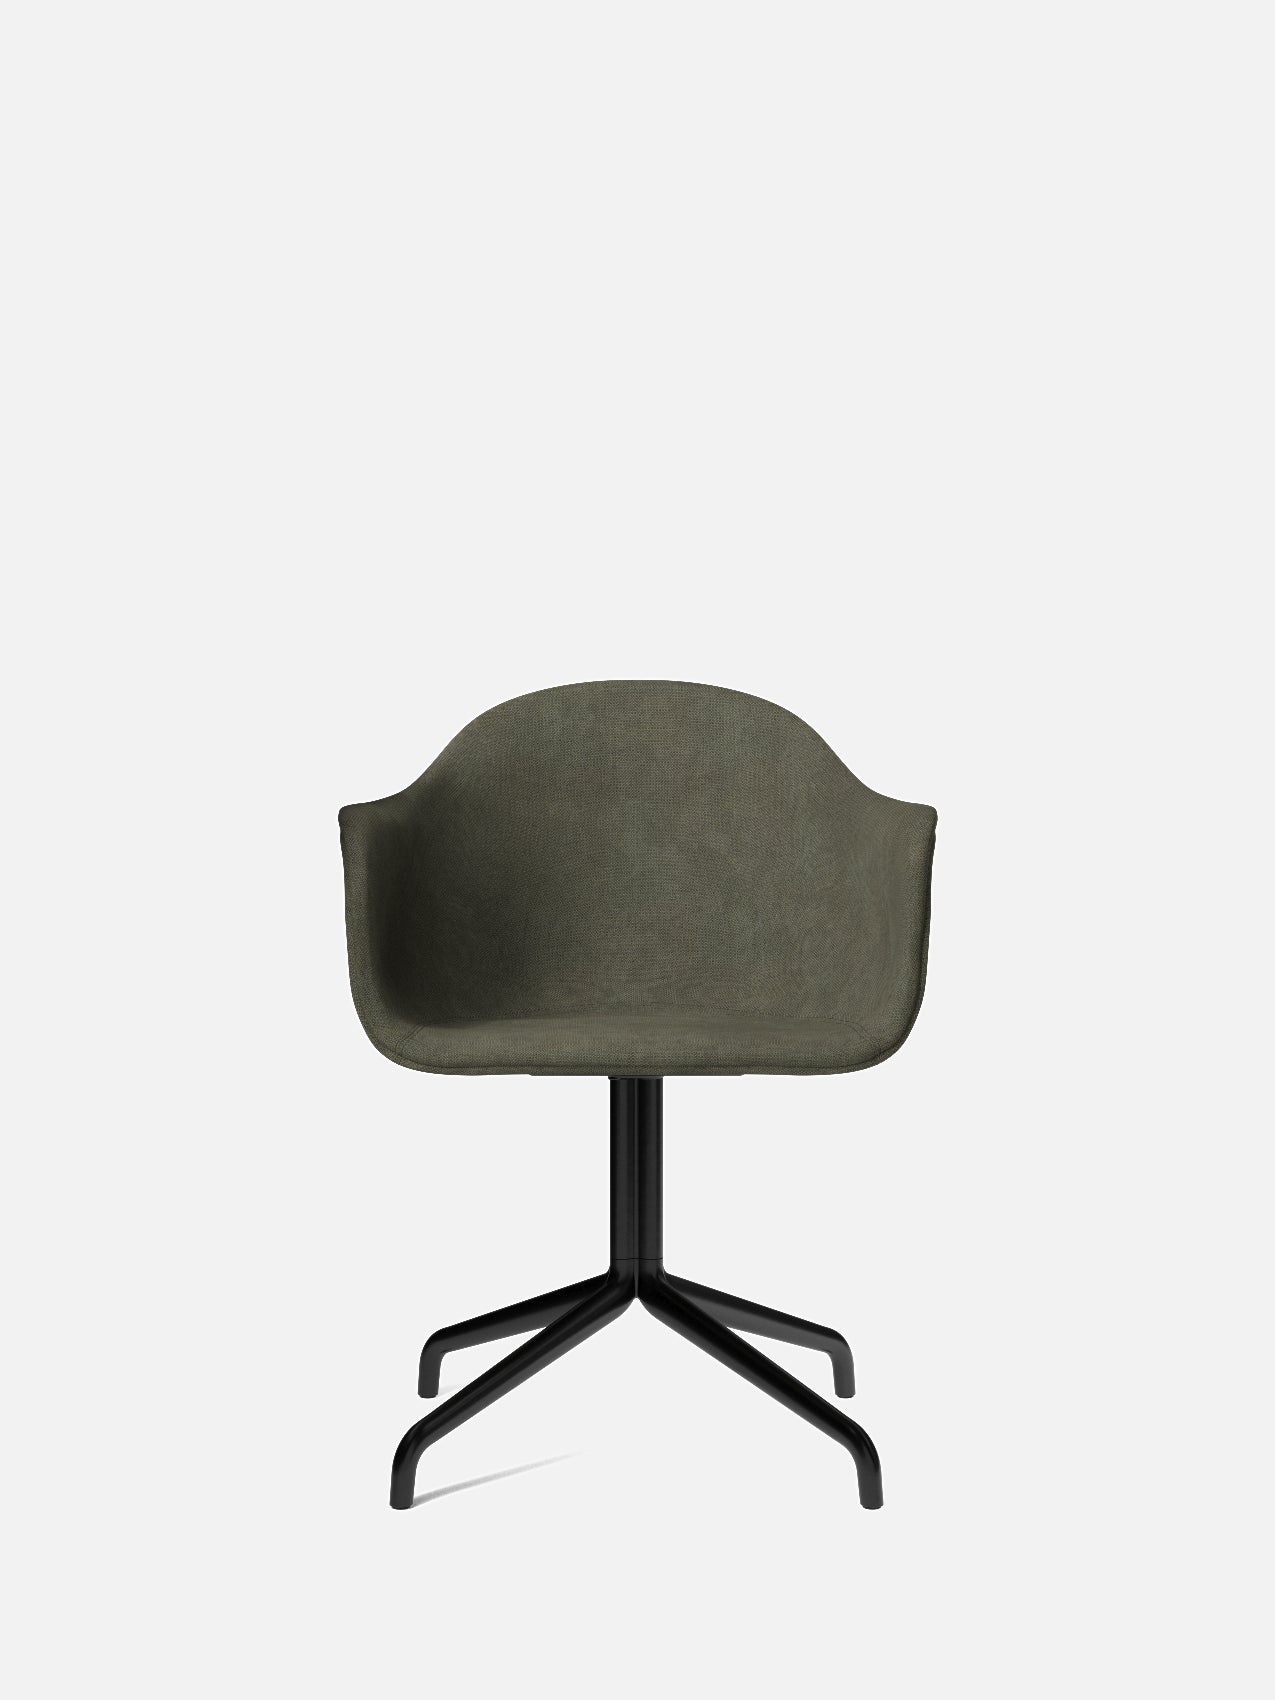 Harbour Arm Chair, Upholstered-Chair-Norm Architects-Star Base (Seat 17.7in H)/Black Steel-961/Fiord2-menu-minimalist-modern-danish-design-home-decor